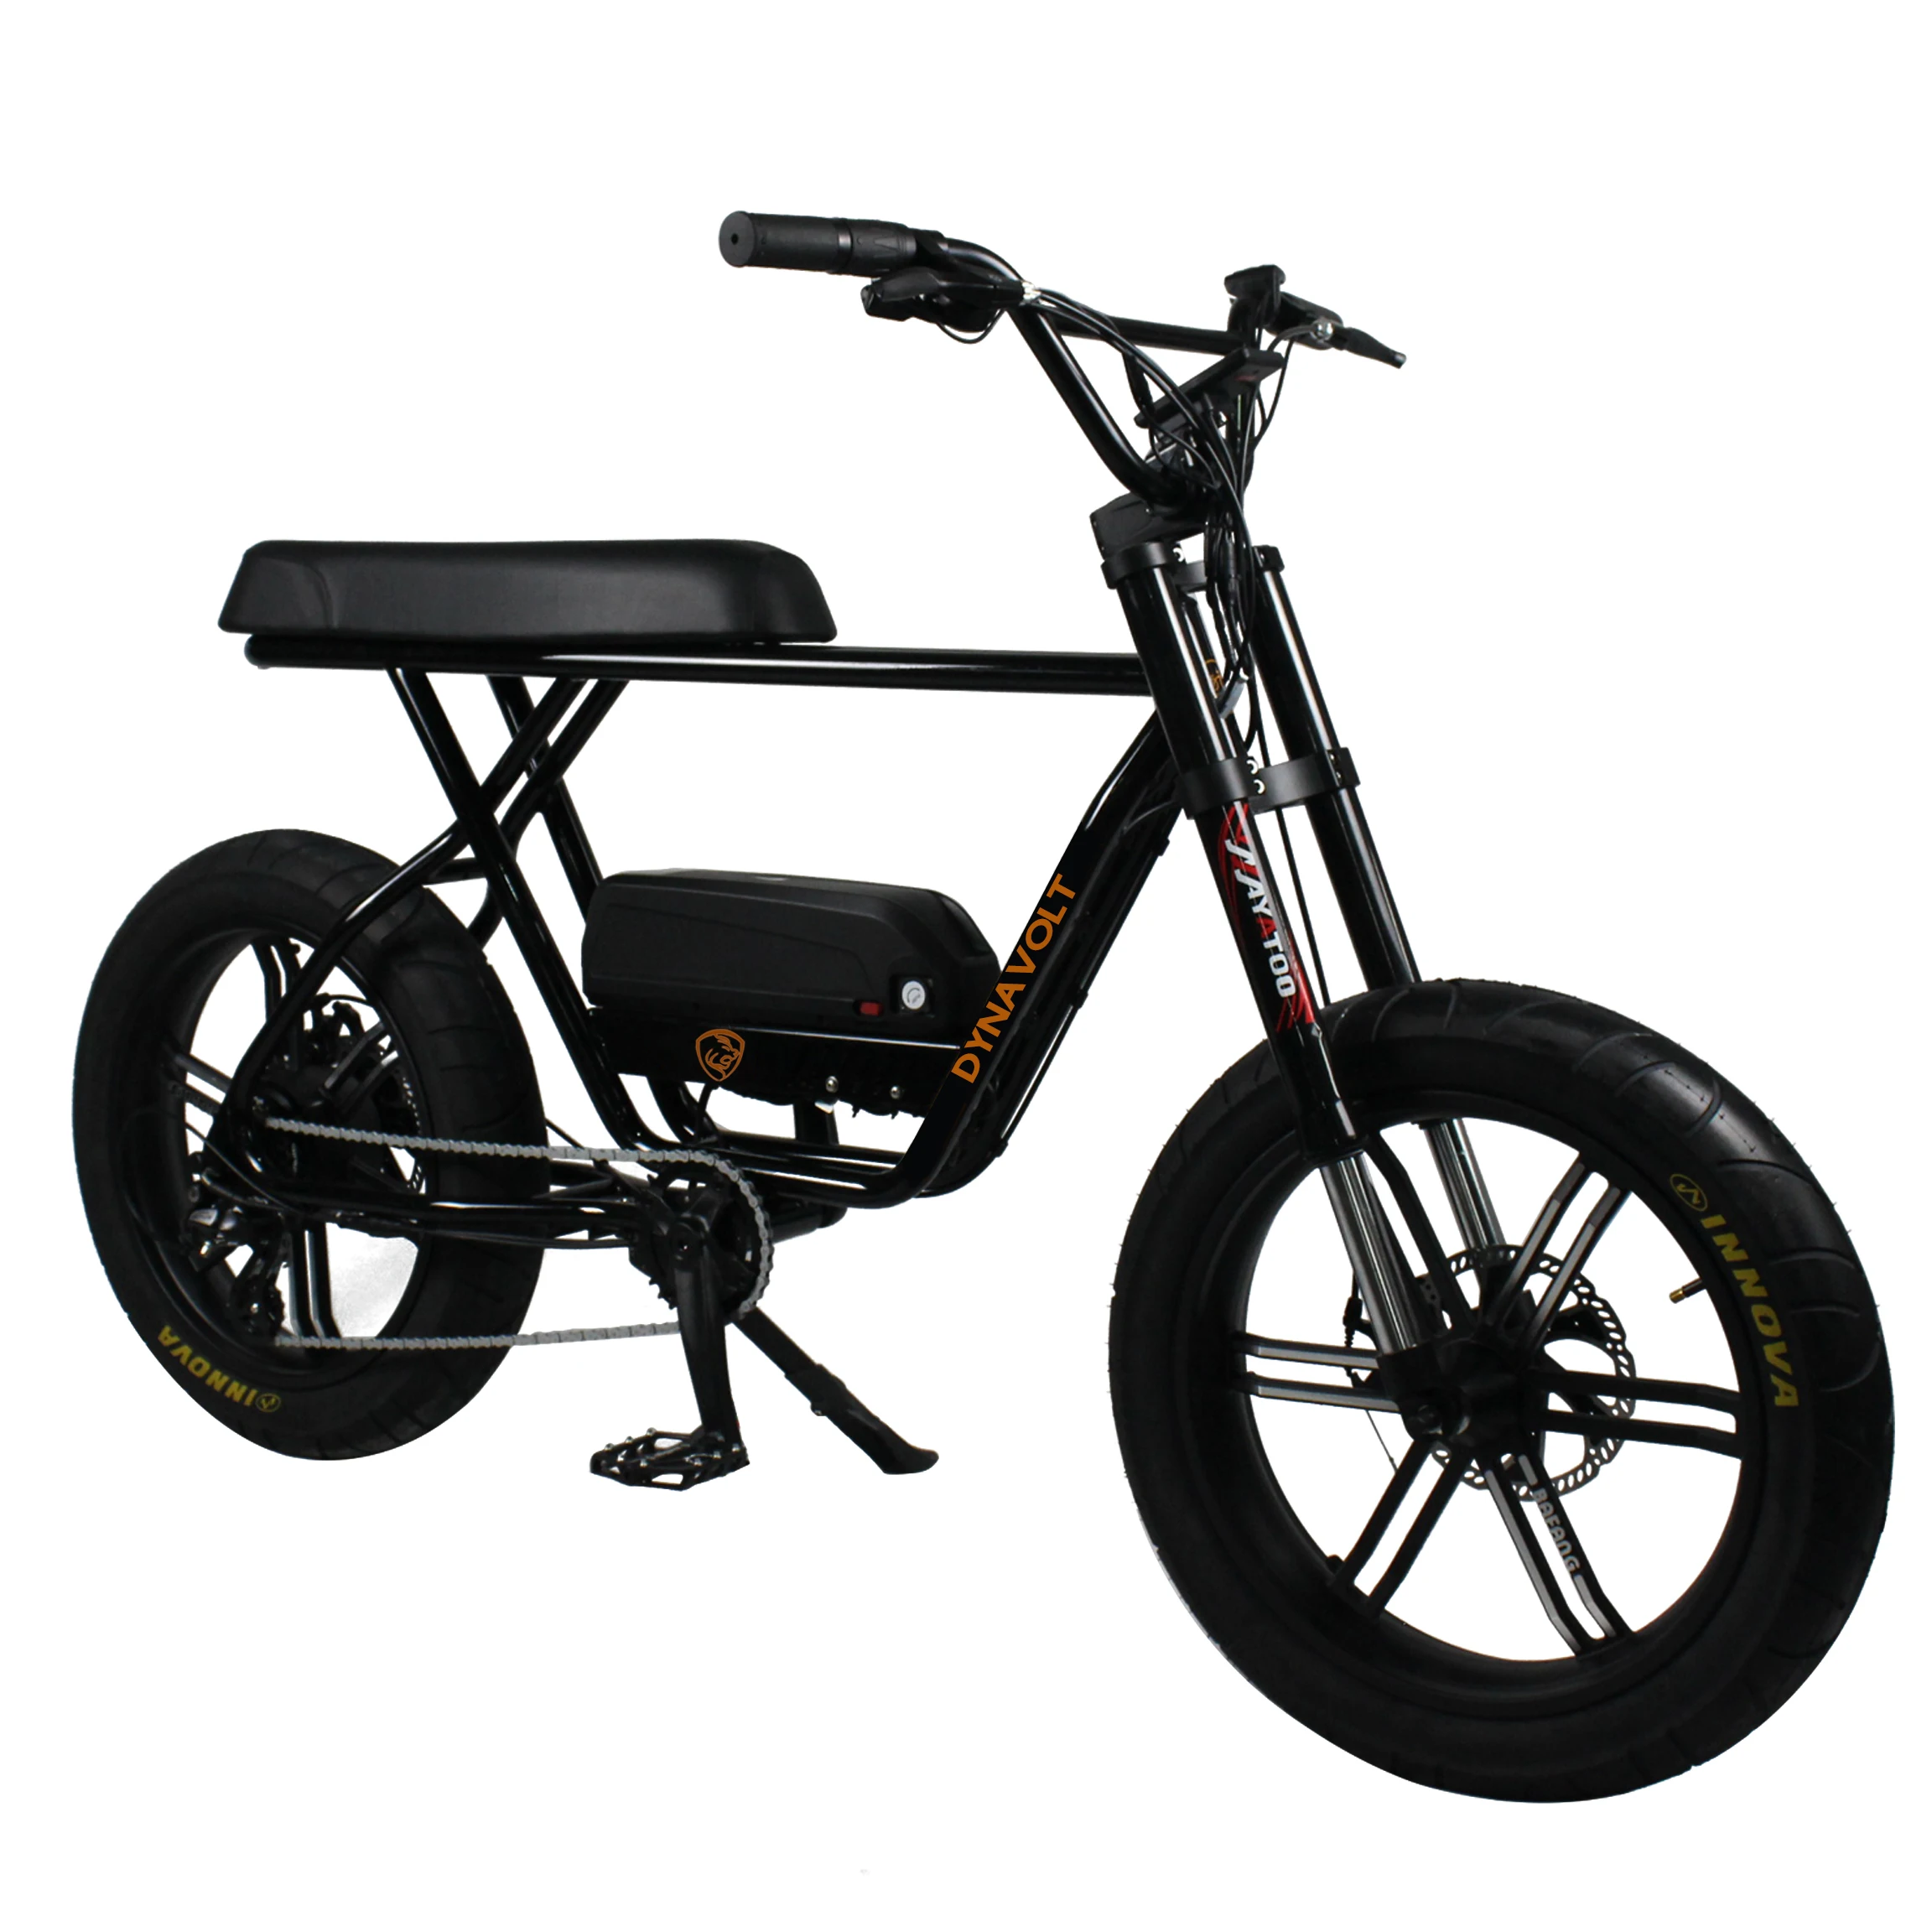 USA Warehouse 48V 11.6Ah Lithium Battery 20 inch Fat Tire Electric Bike